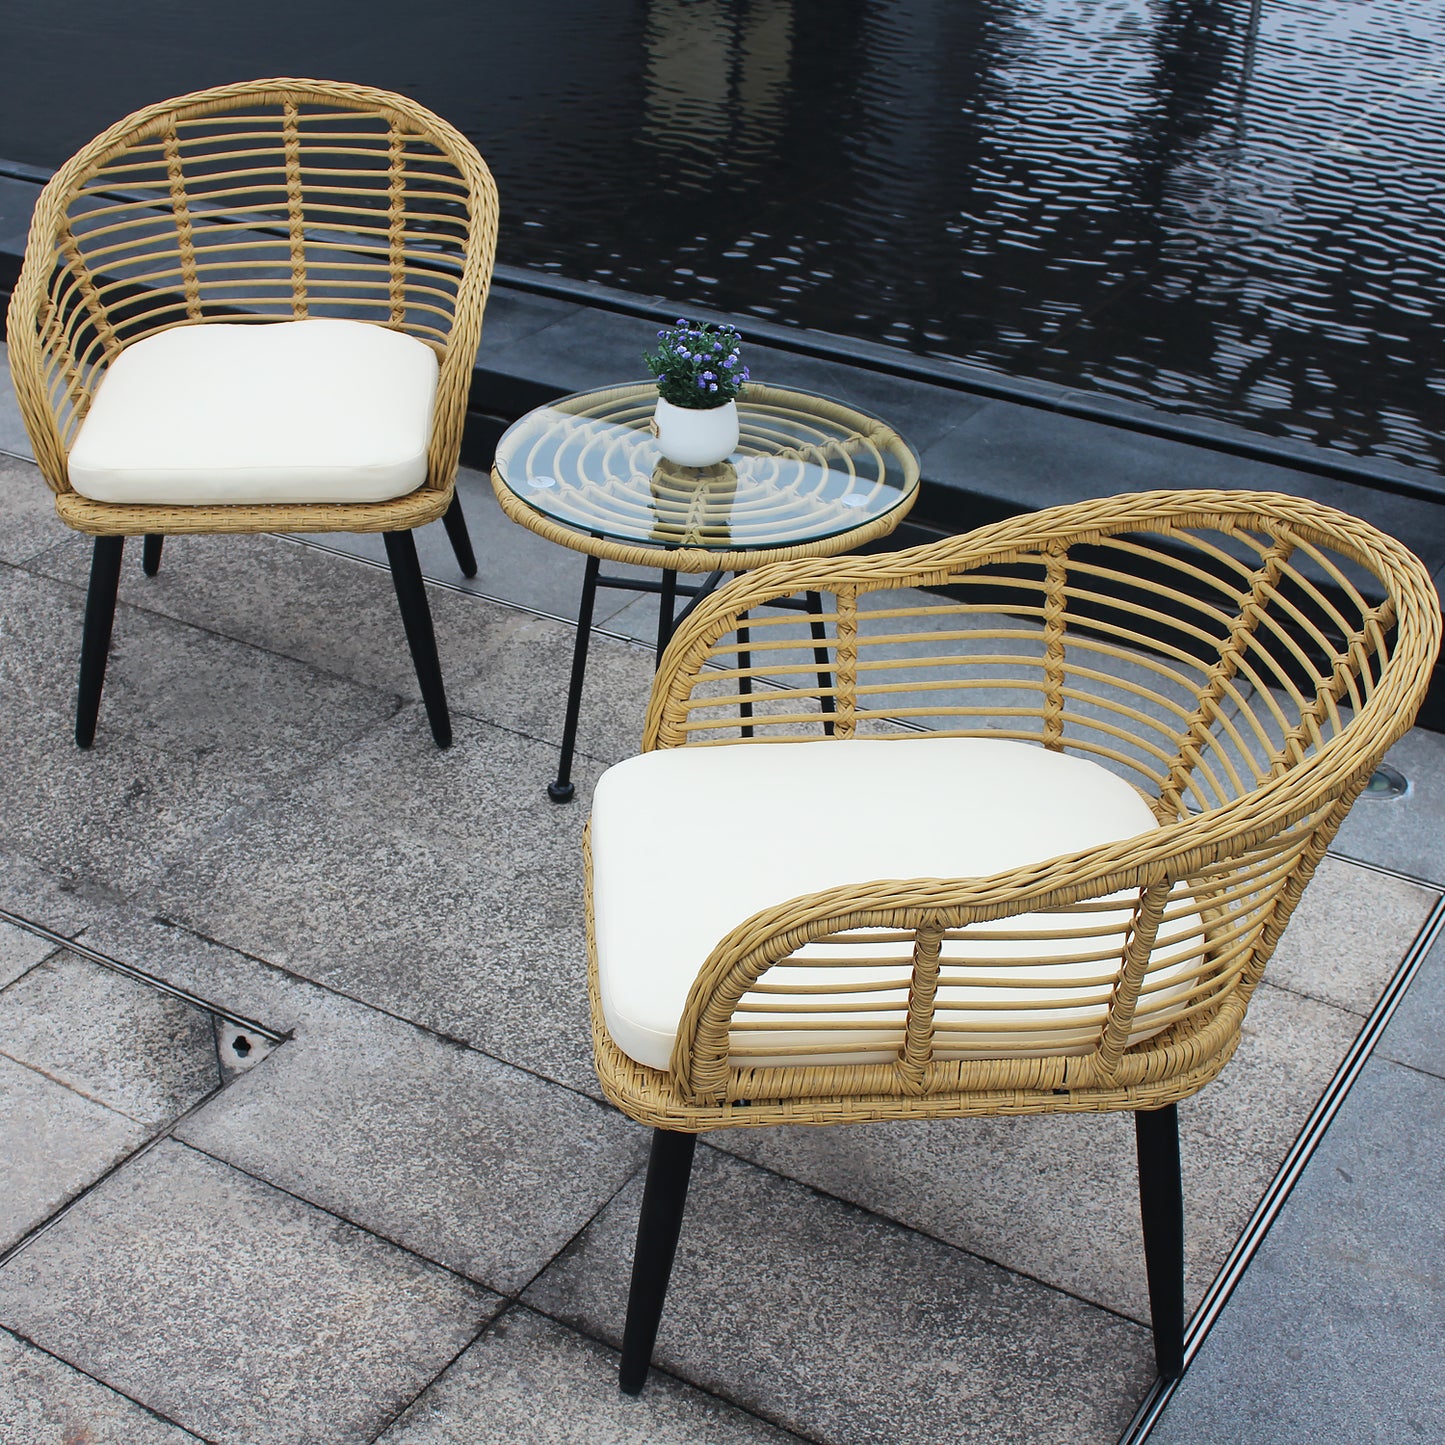 3 Pieces Outdoor Patio Balcony Natural Yellow Wicker Chair Table Set with Beige Cushion and Tempered Glass Table Top